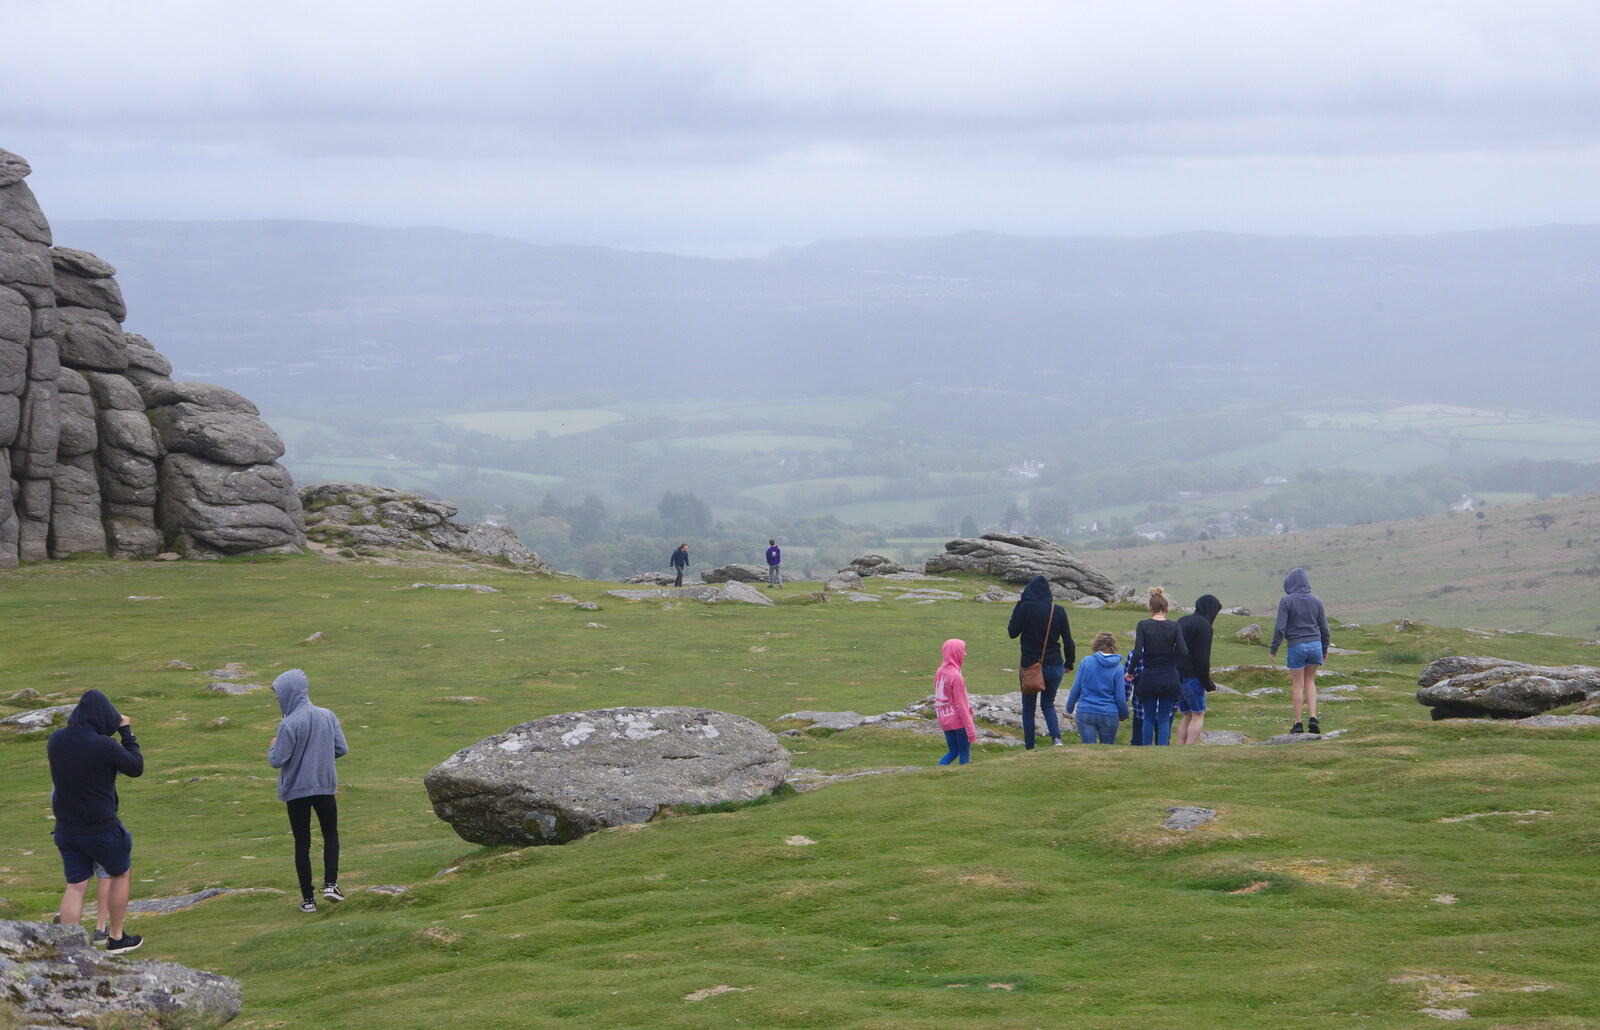 People walk around from The Tom Cobley and a Return to Haytor, Bovey Tracey, Devon - 27th May 2019